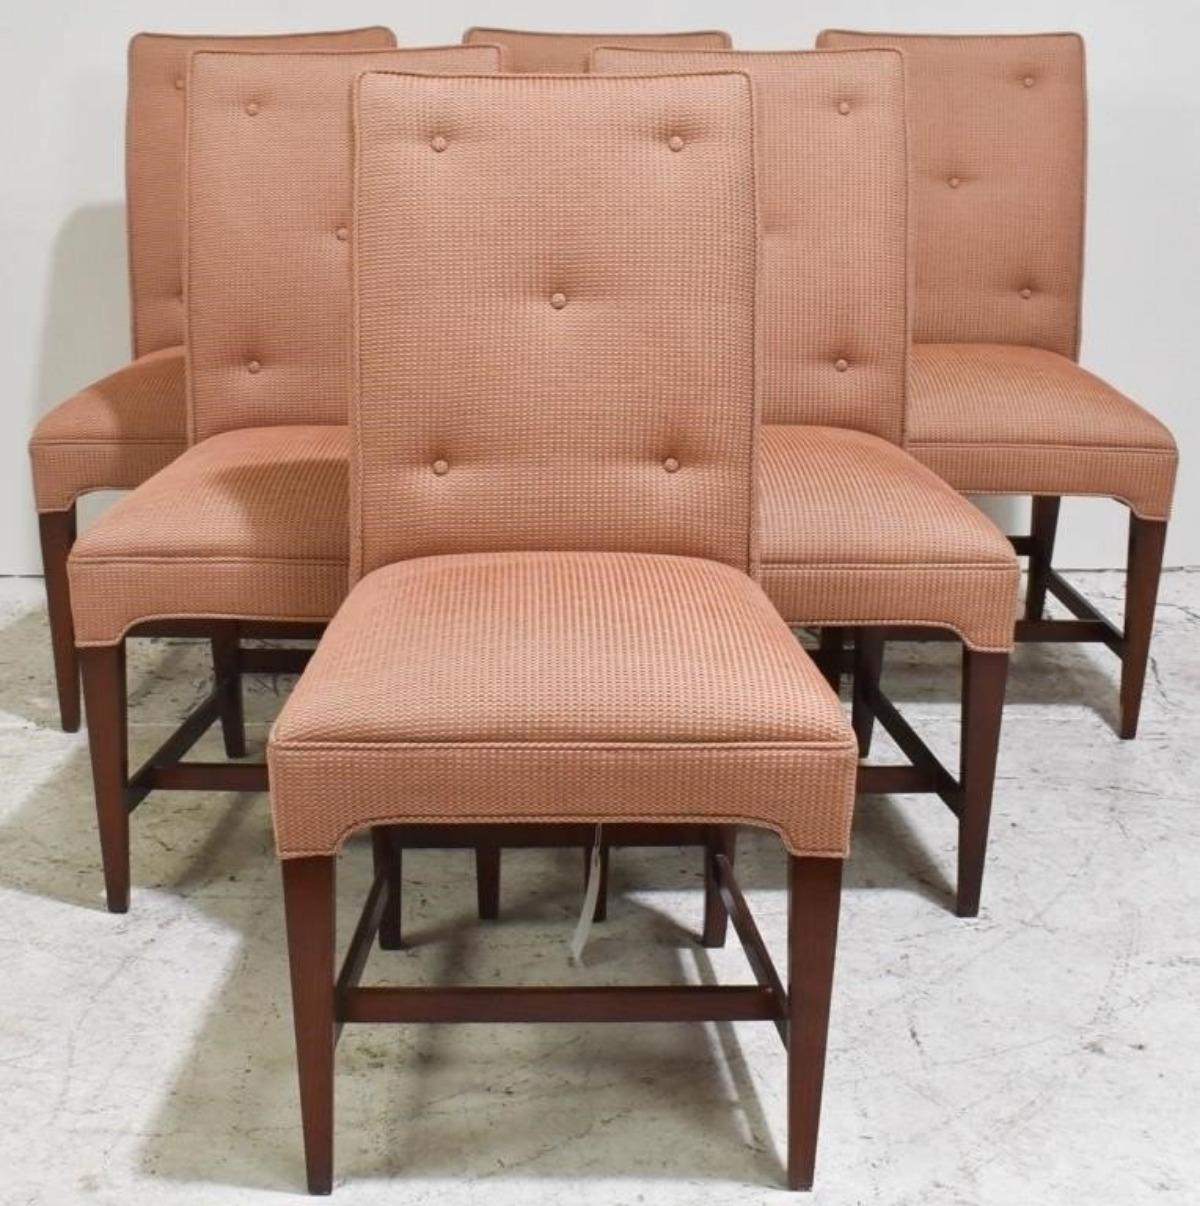 A suite of 6 elegant Mid-Century Modern dining chairs.